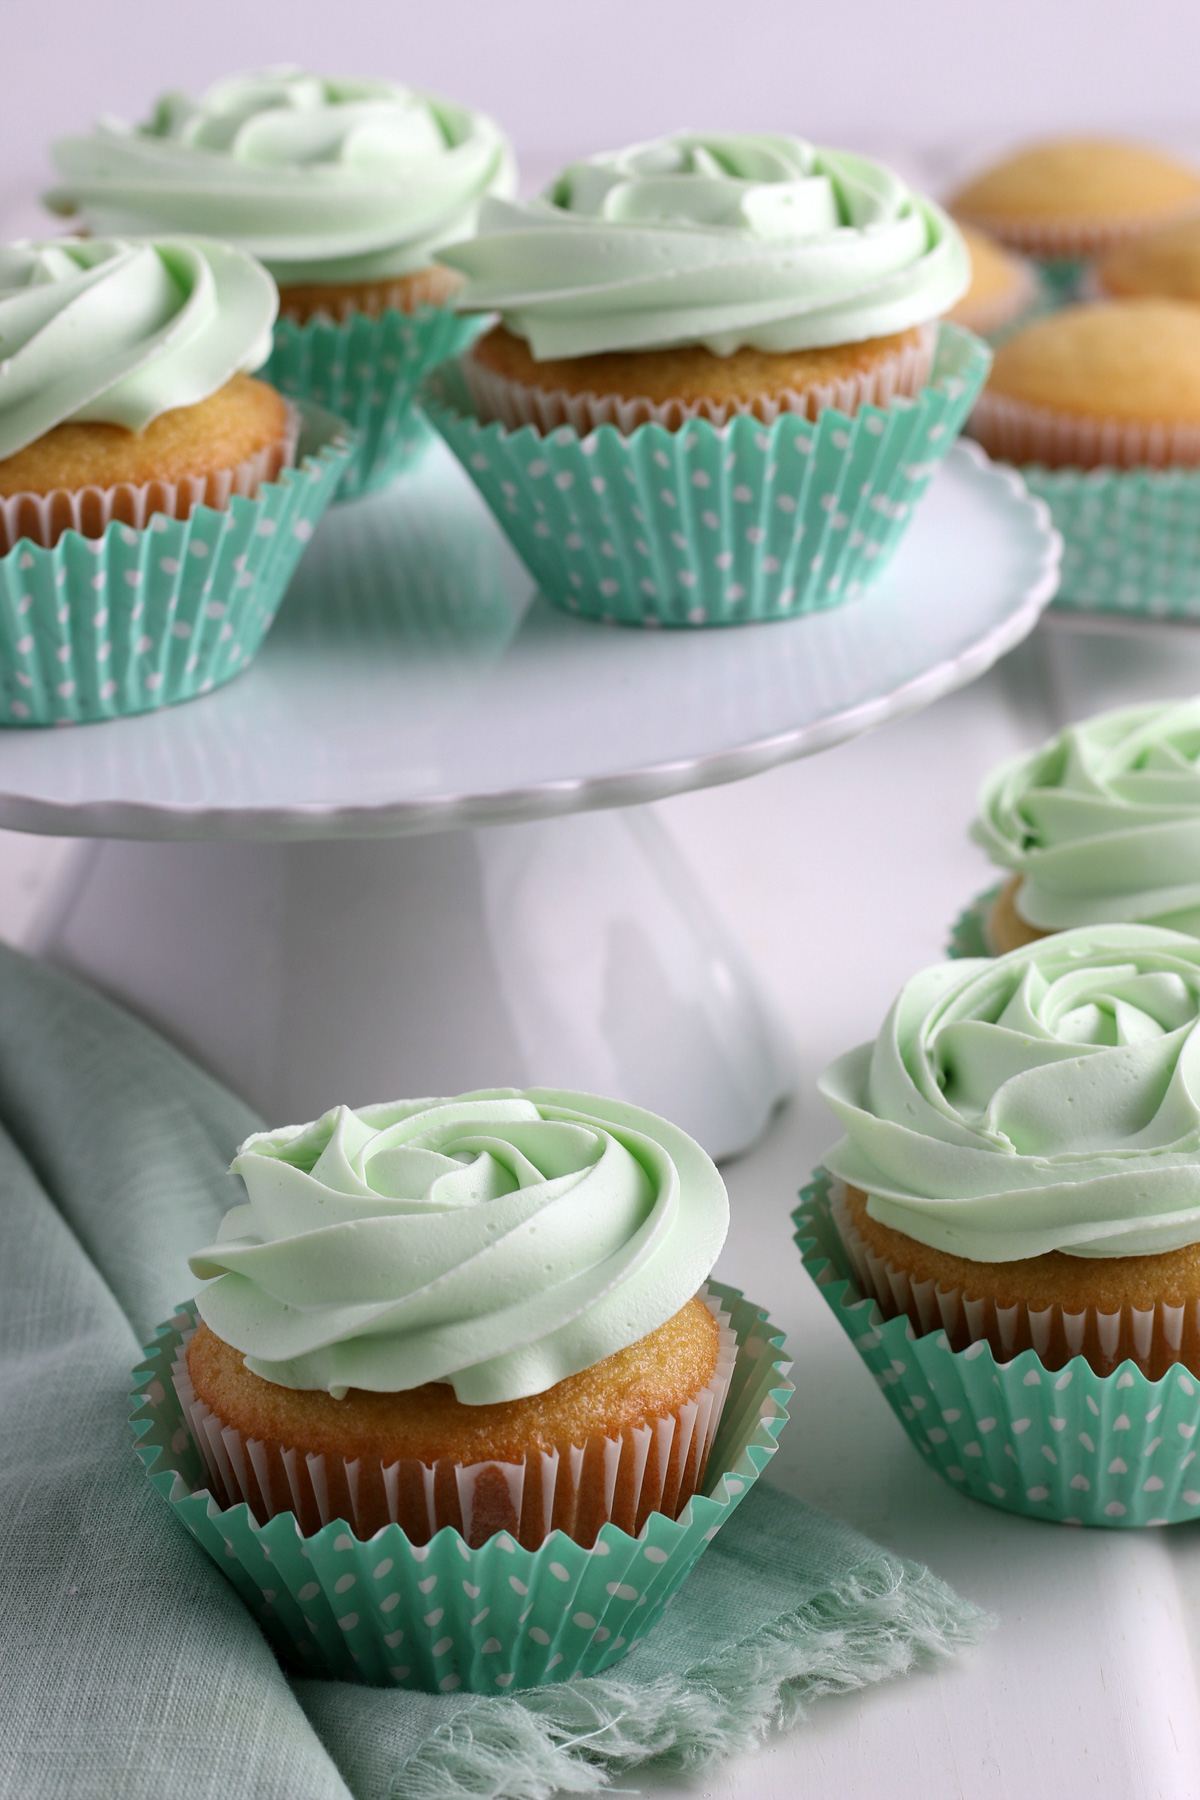 gluten-free vanilla cupcakes topped with green buttercream rosettes, in sea green cupcake liners